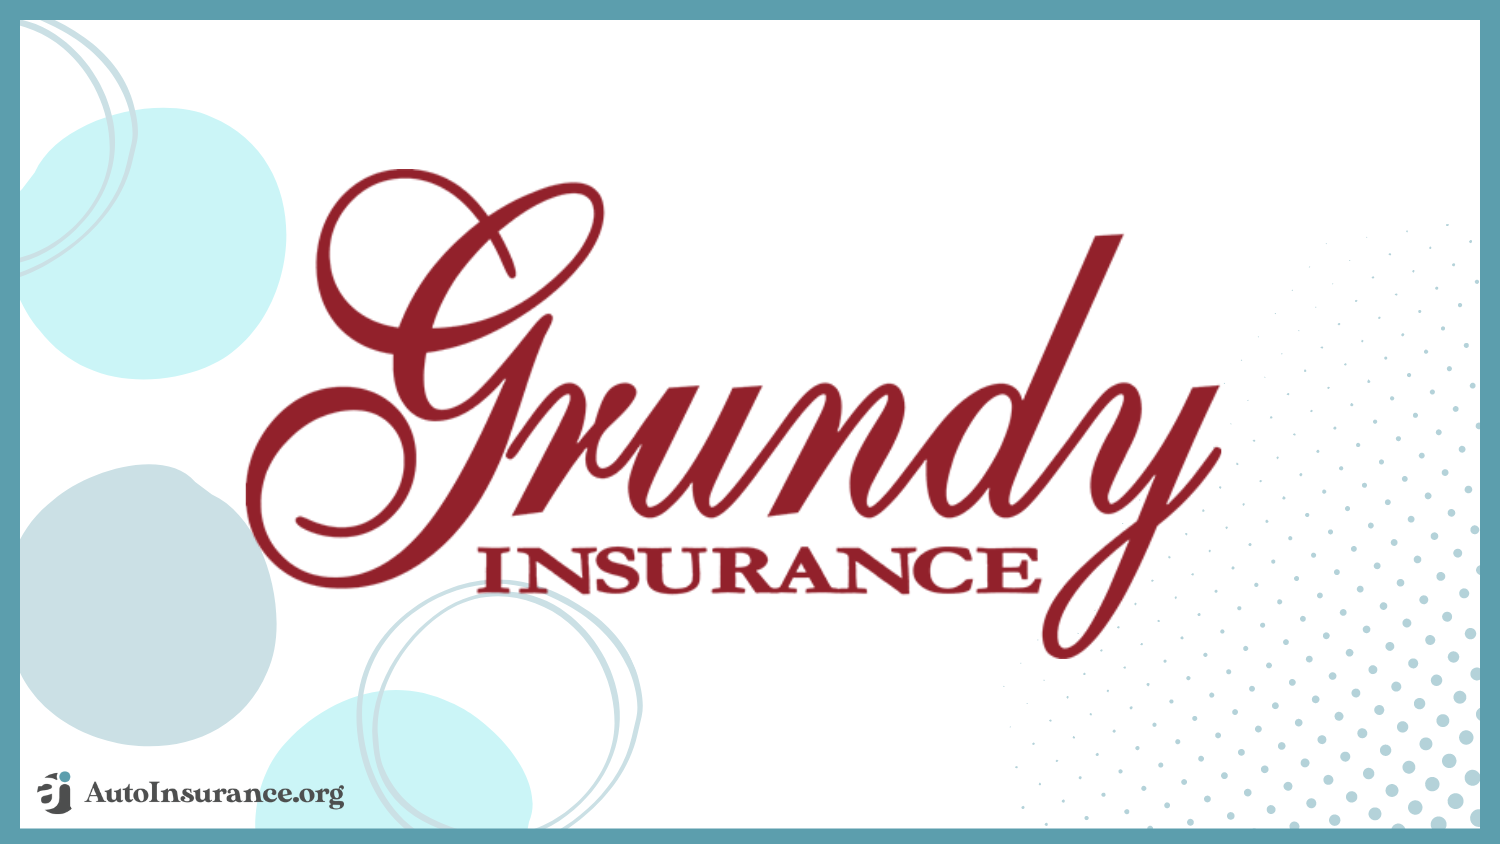 Grundy: best Auto Insurance Companies for Modified Cars